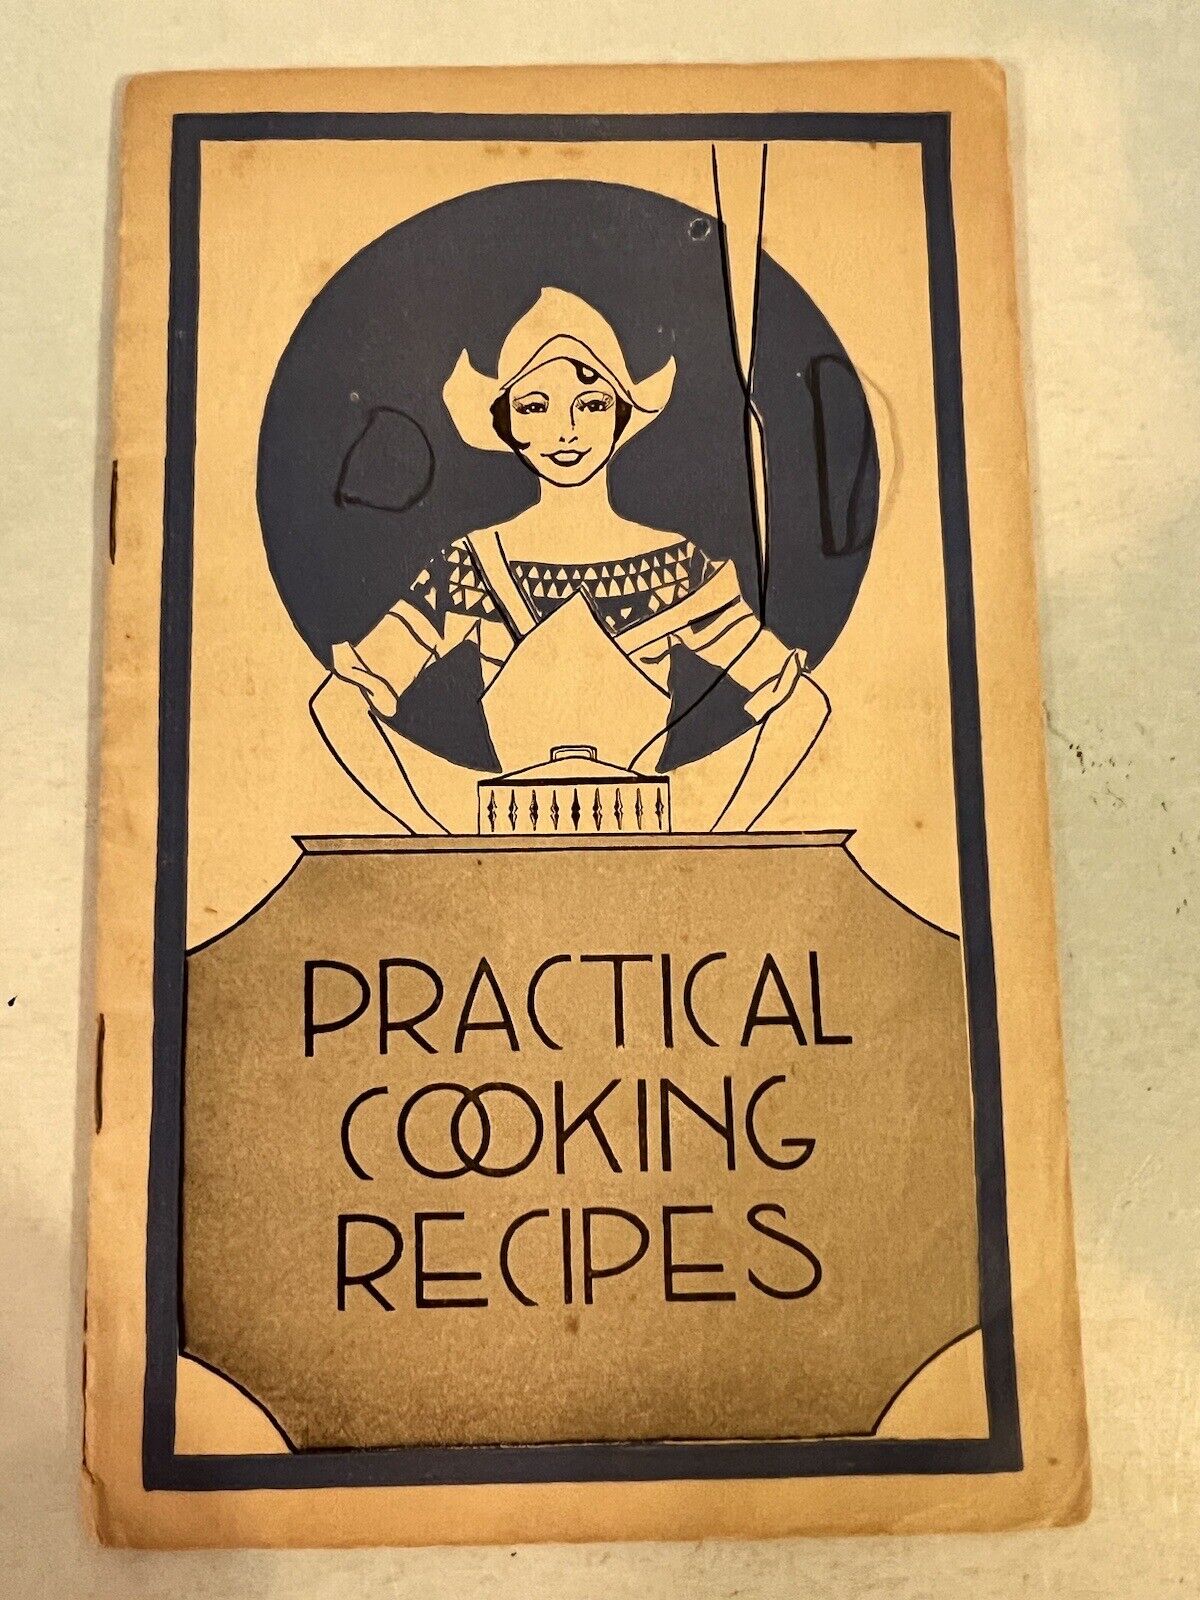 Lydia E. Pinkham VTG 1920s “Practical Cooking Recipes” Cook Booklet